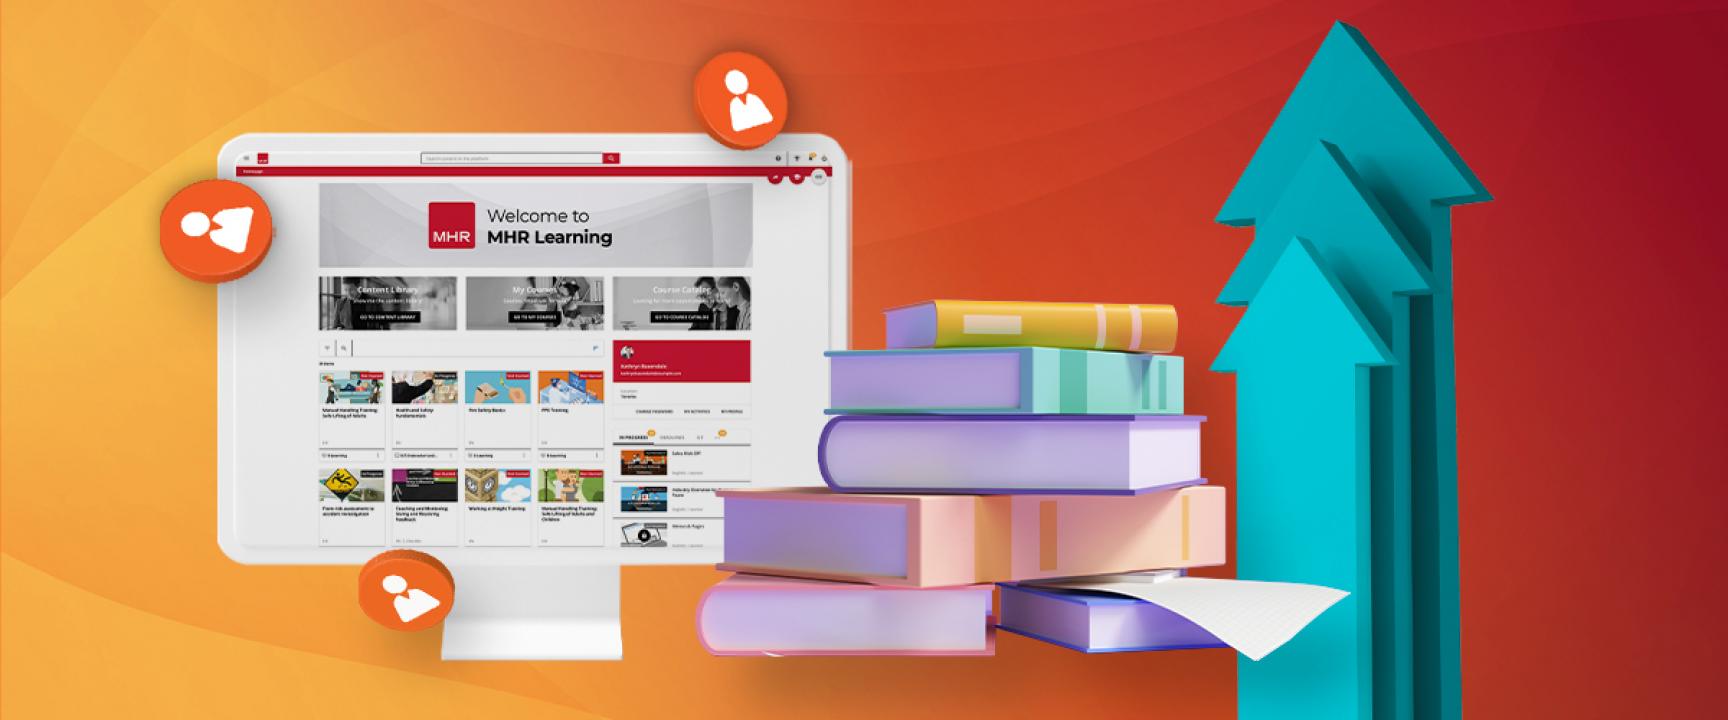 HR learning pillar page header, showing a desktop with MHR learning software displaying, books and arrows increasing.